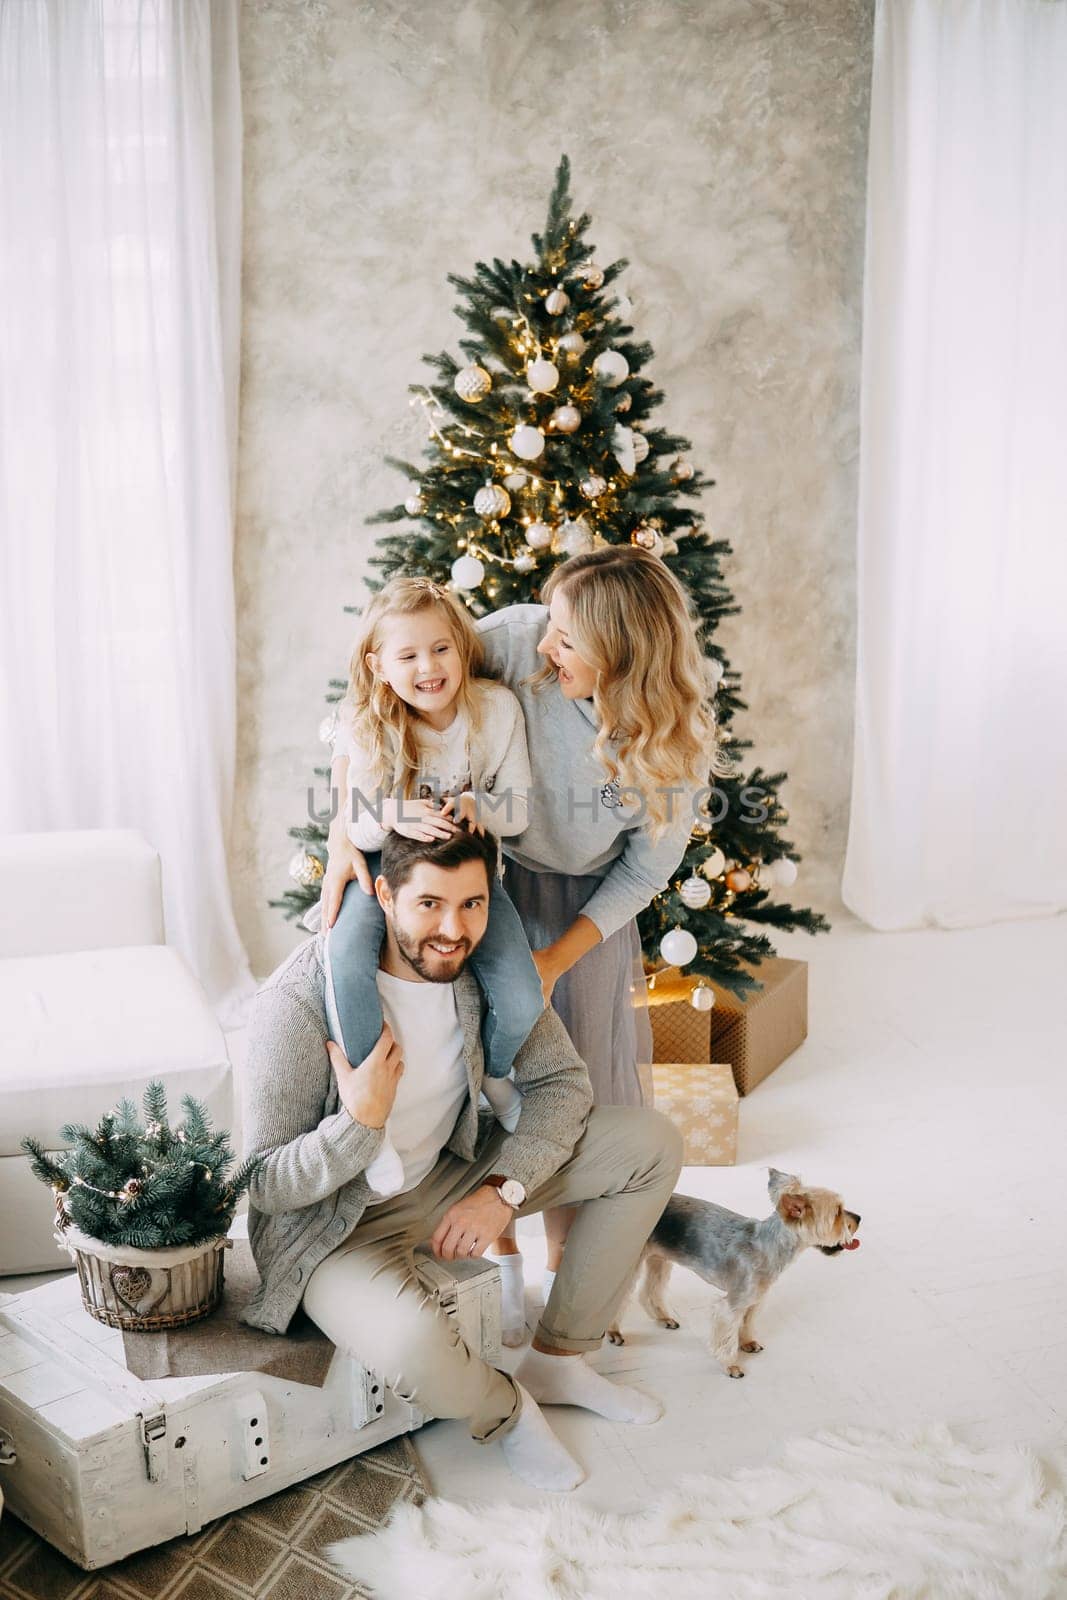 Happy family: mom, dad and daughter. Family in a bright New Year's interior with a Christmas tree